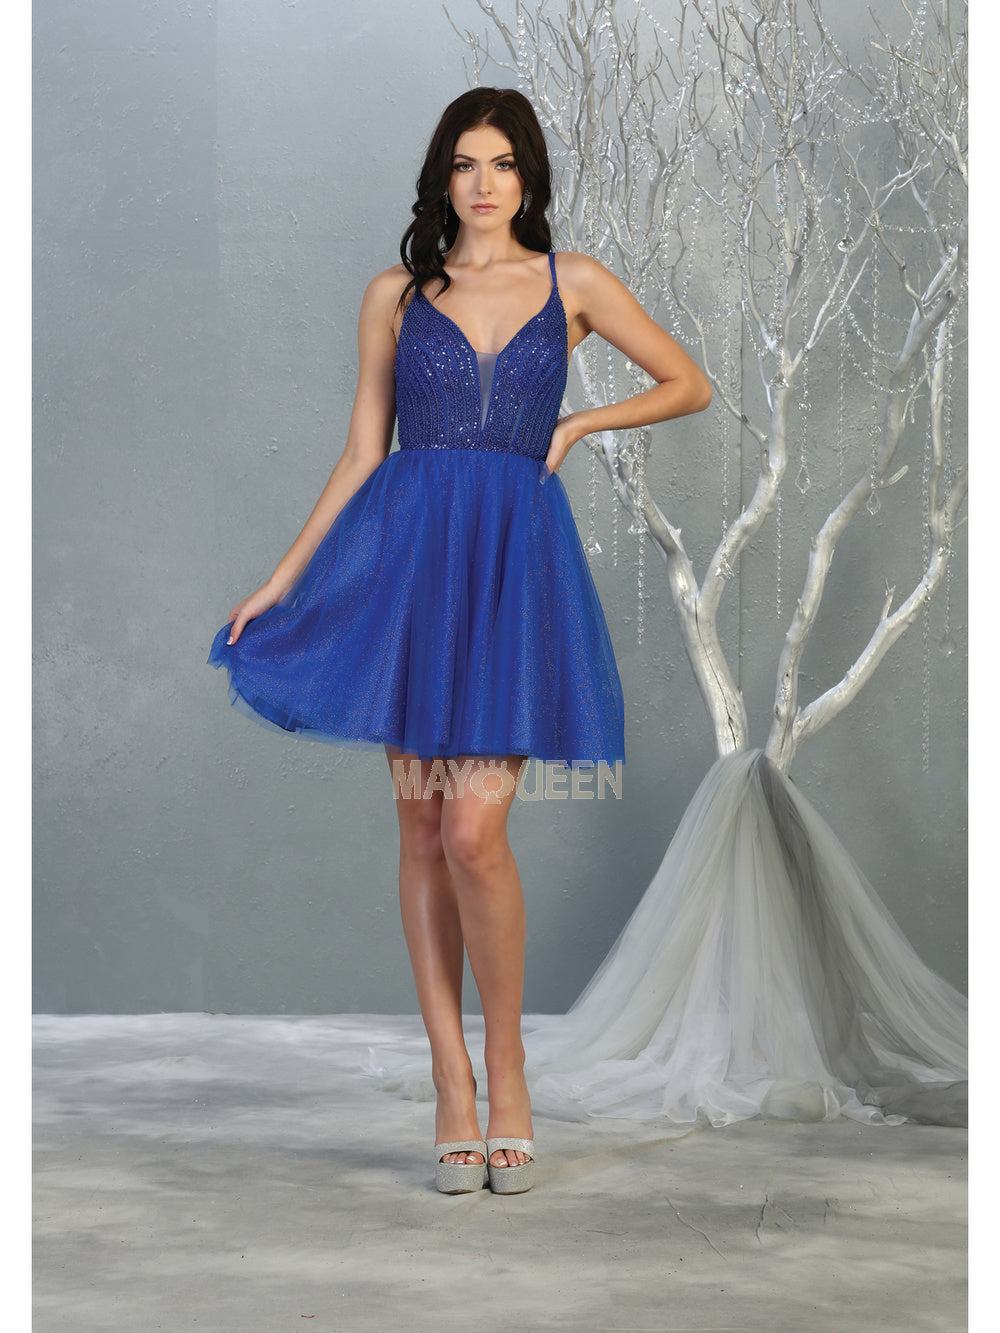 MQ 1800 - Shimmer Tulle A-Line Homecoming Dress with Sheer Beaded Bodice Homecoming Mayqueen 4 Royal 